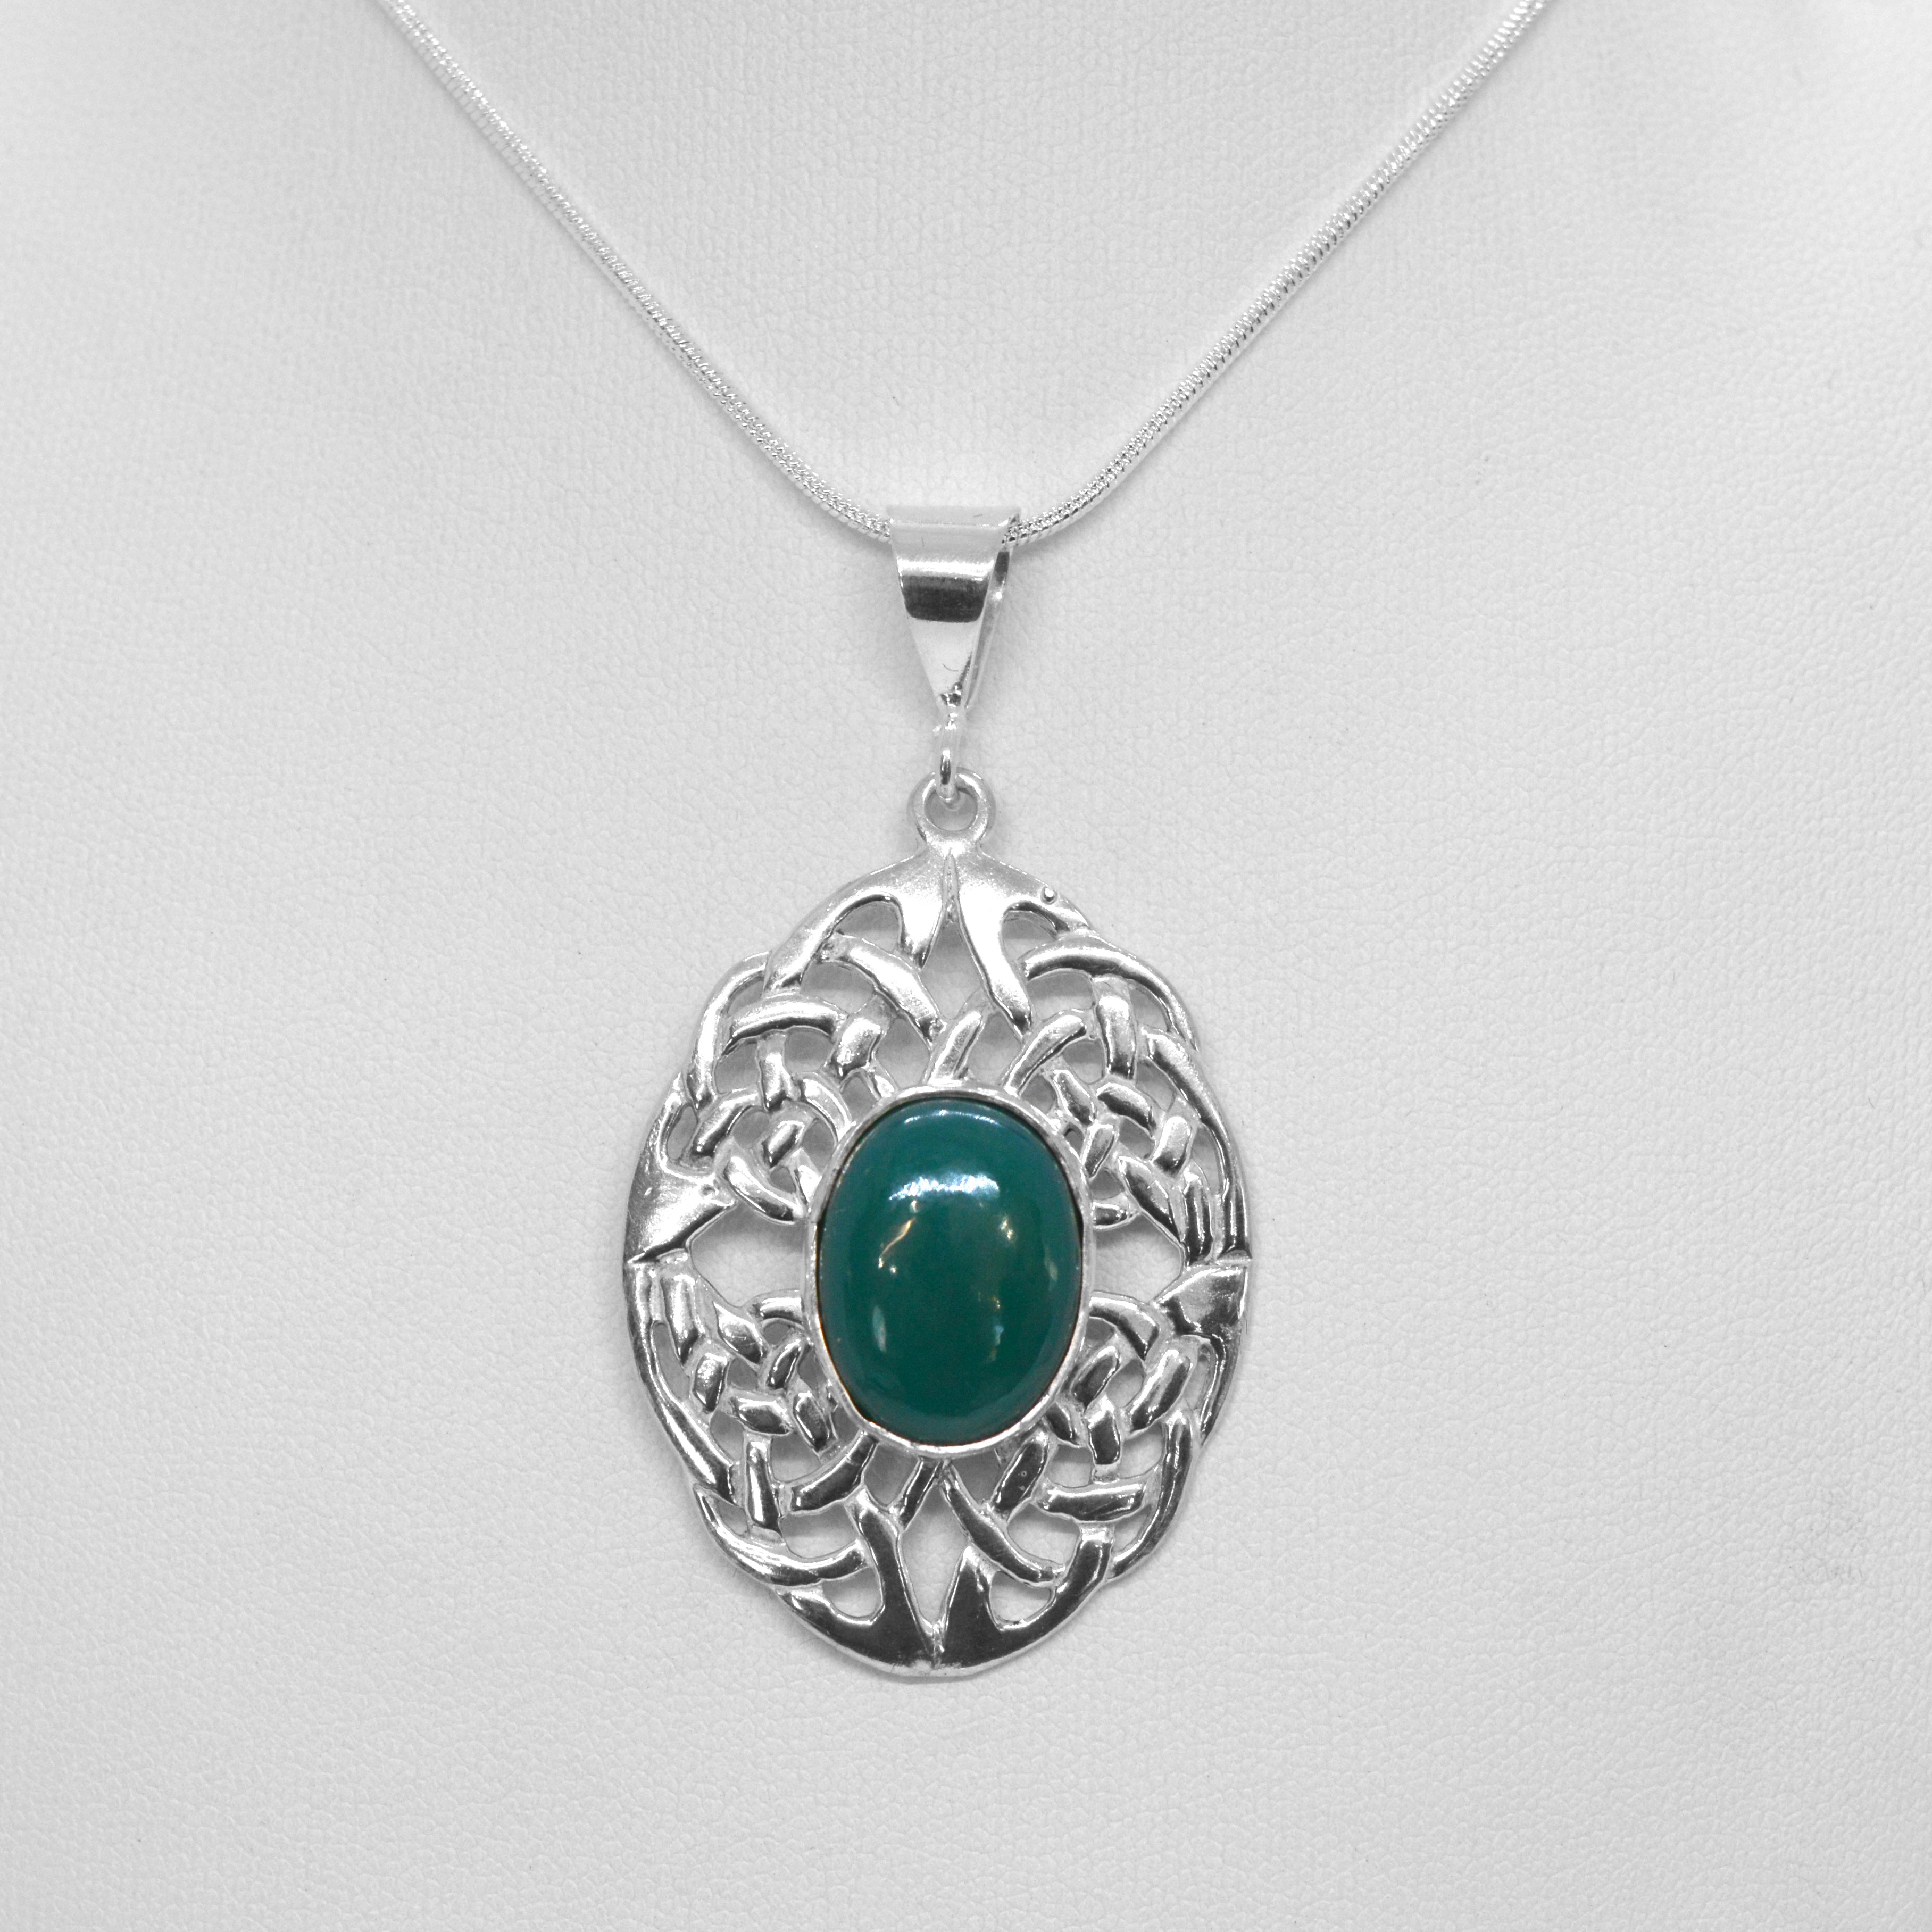 Celtic Knot Pendant with Green Onyx